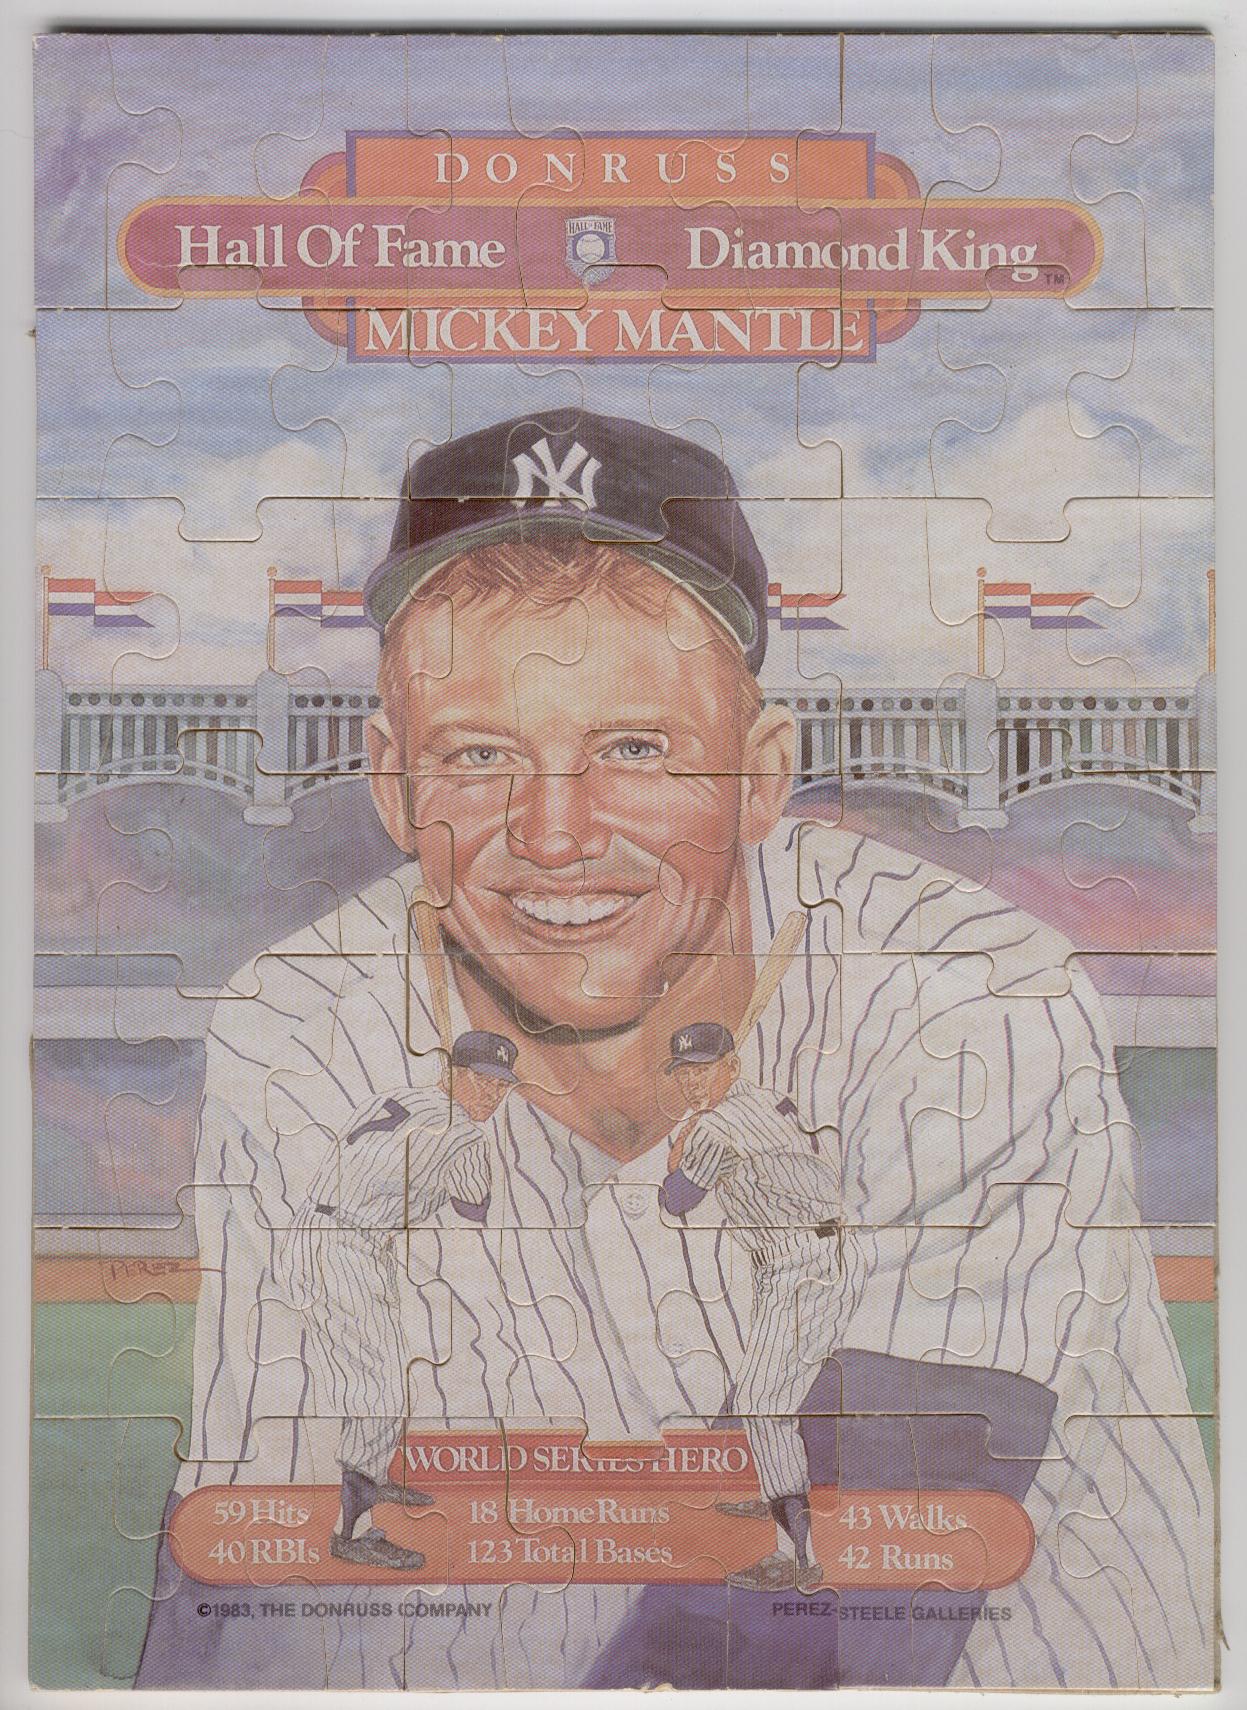 1983 Mickey Mantle Puzzle